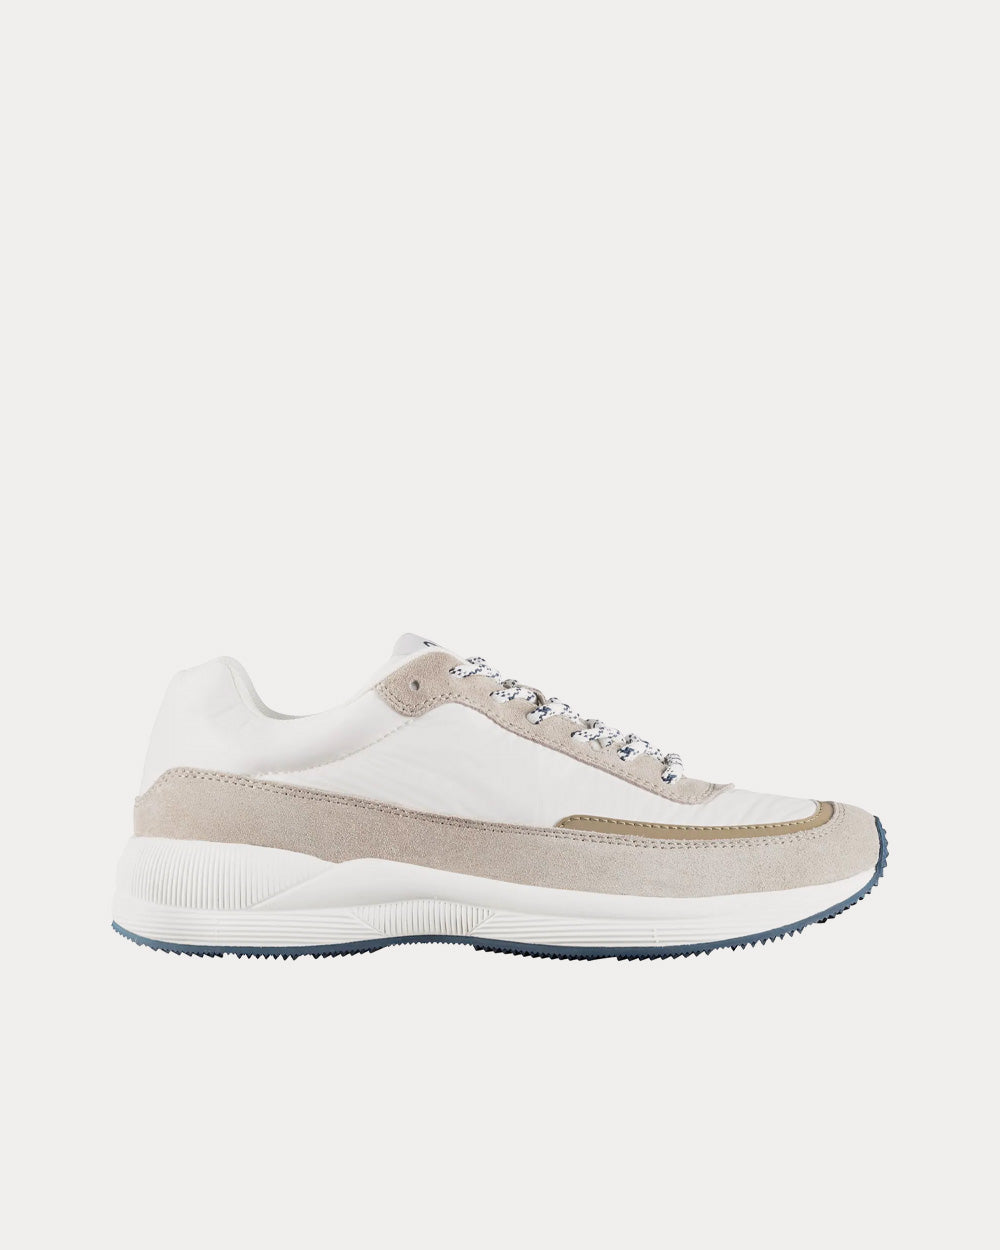 A.P.C. Mary Teenage White Low Top Sneakers - Sneak in Peace